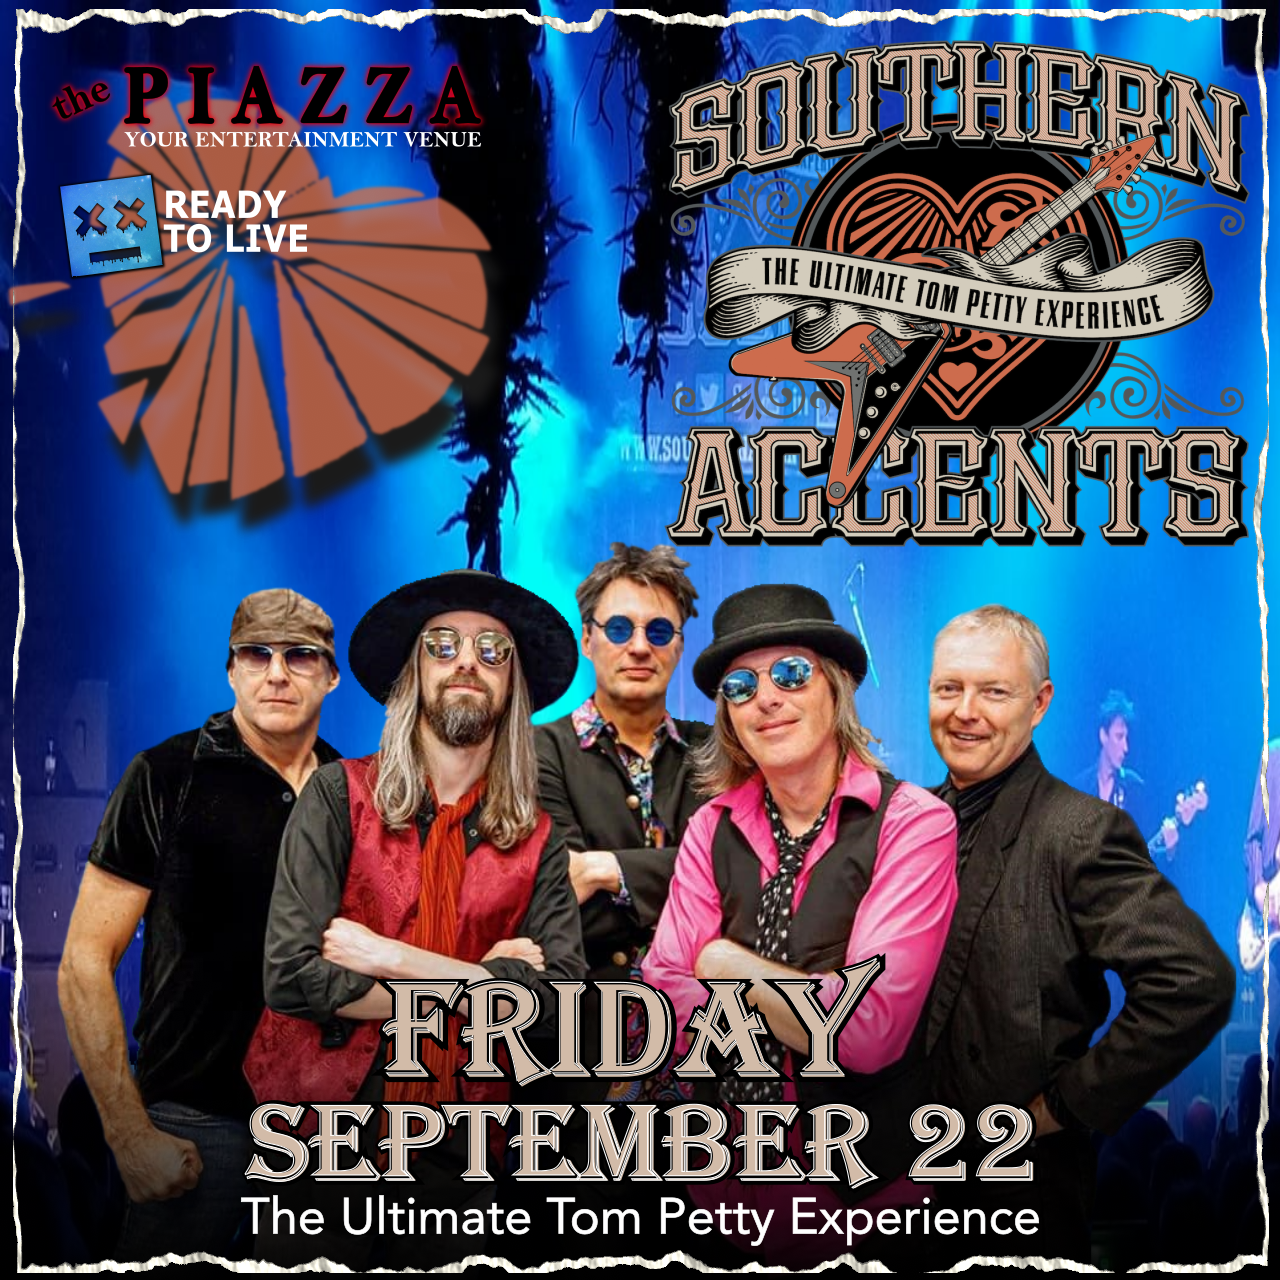 Southern Accents LIVE at The Piazza!